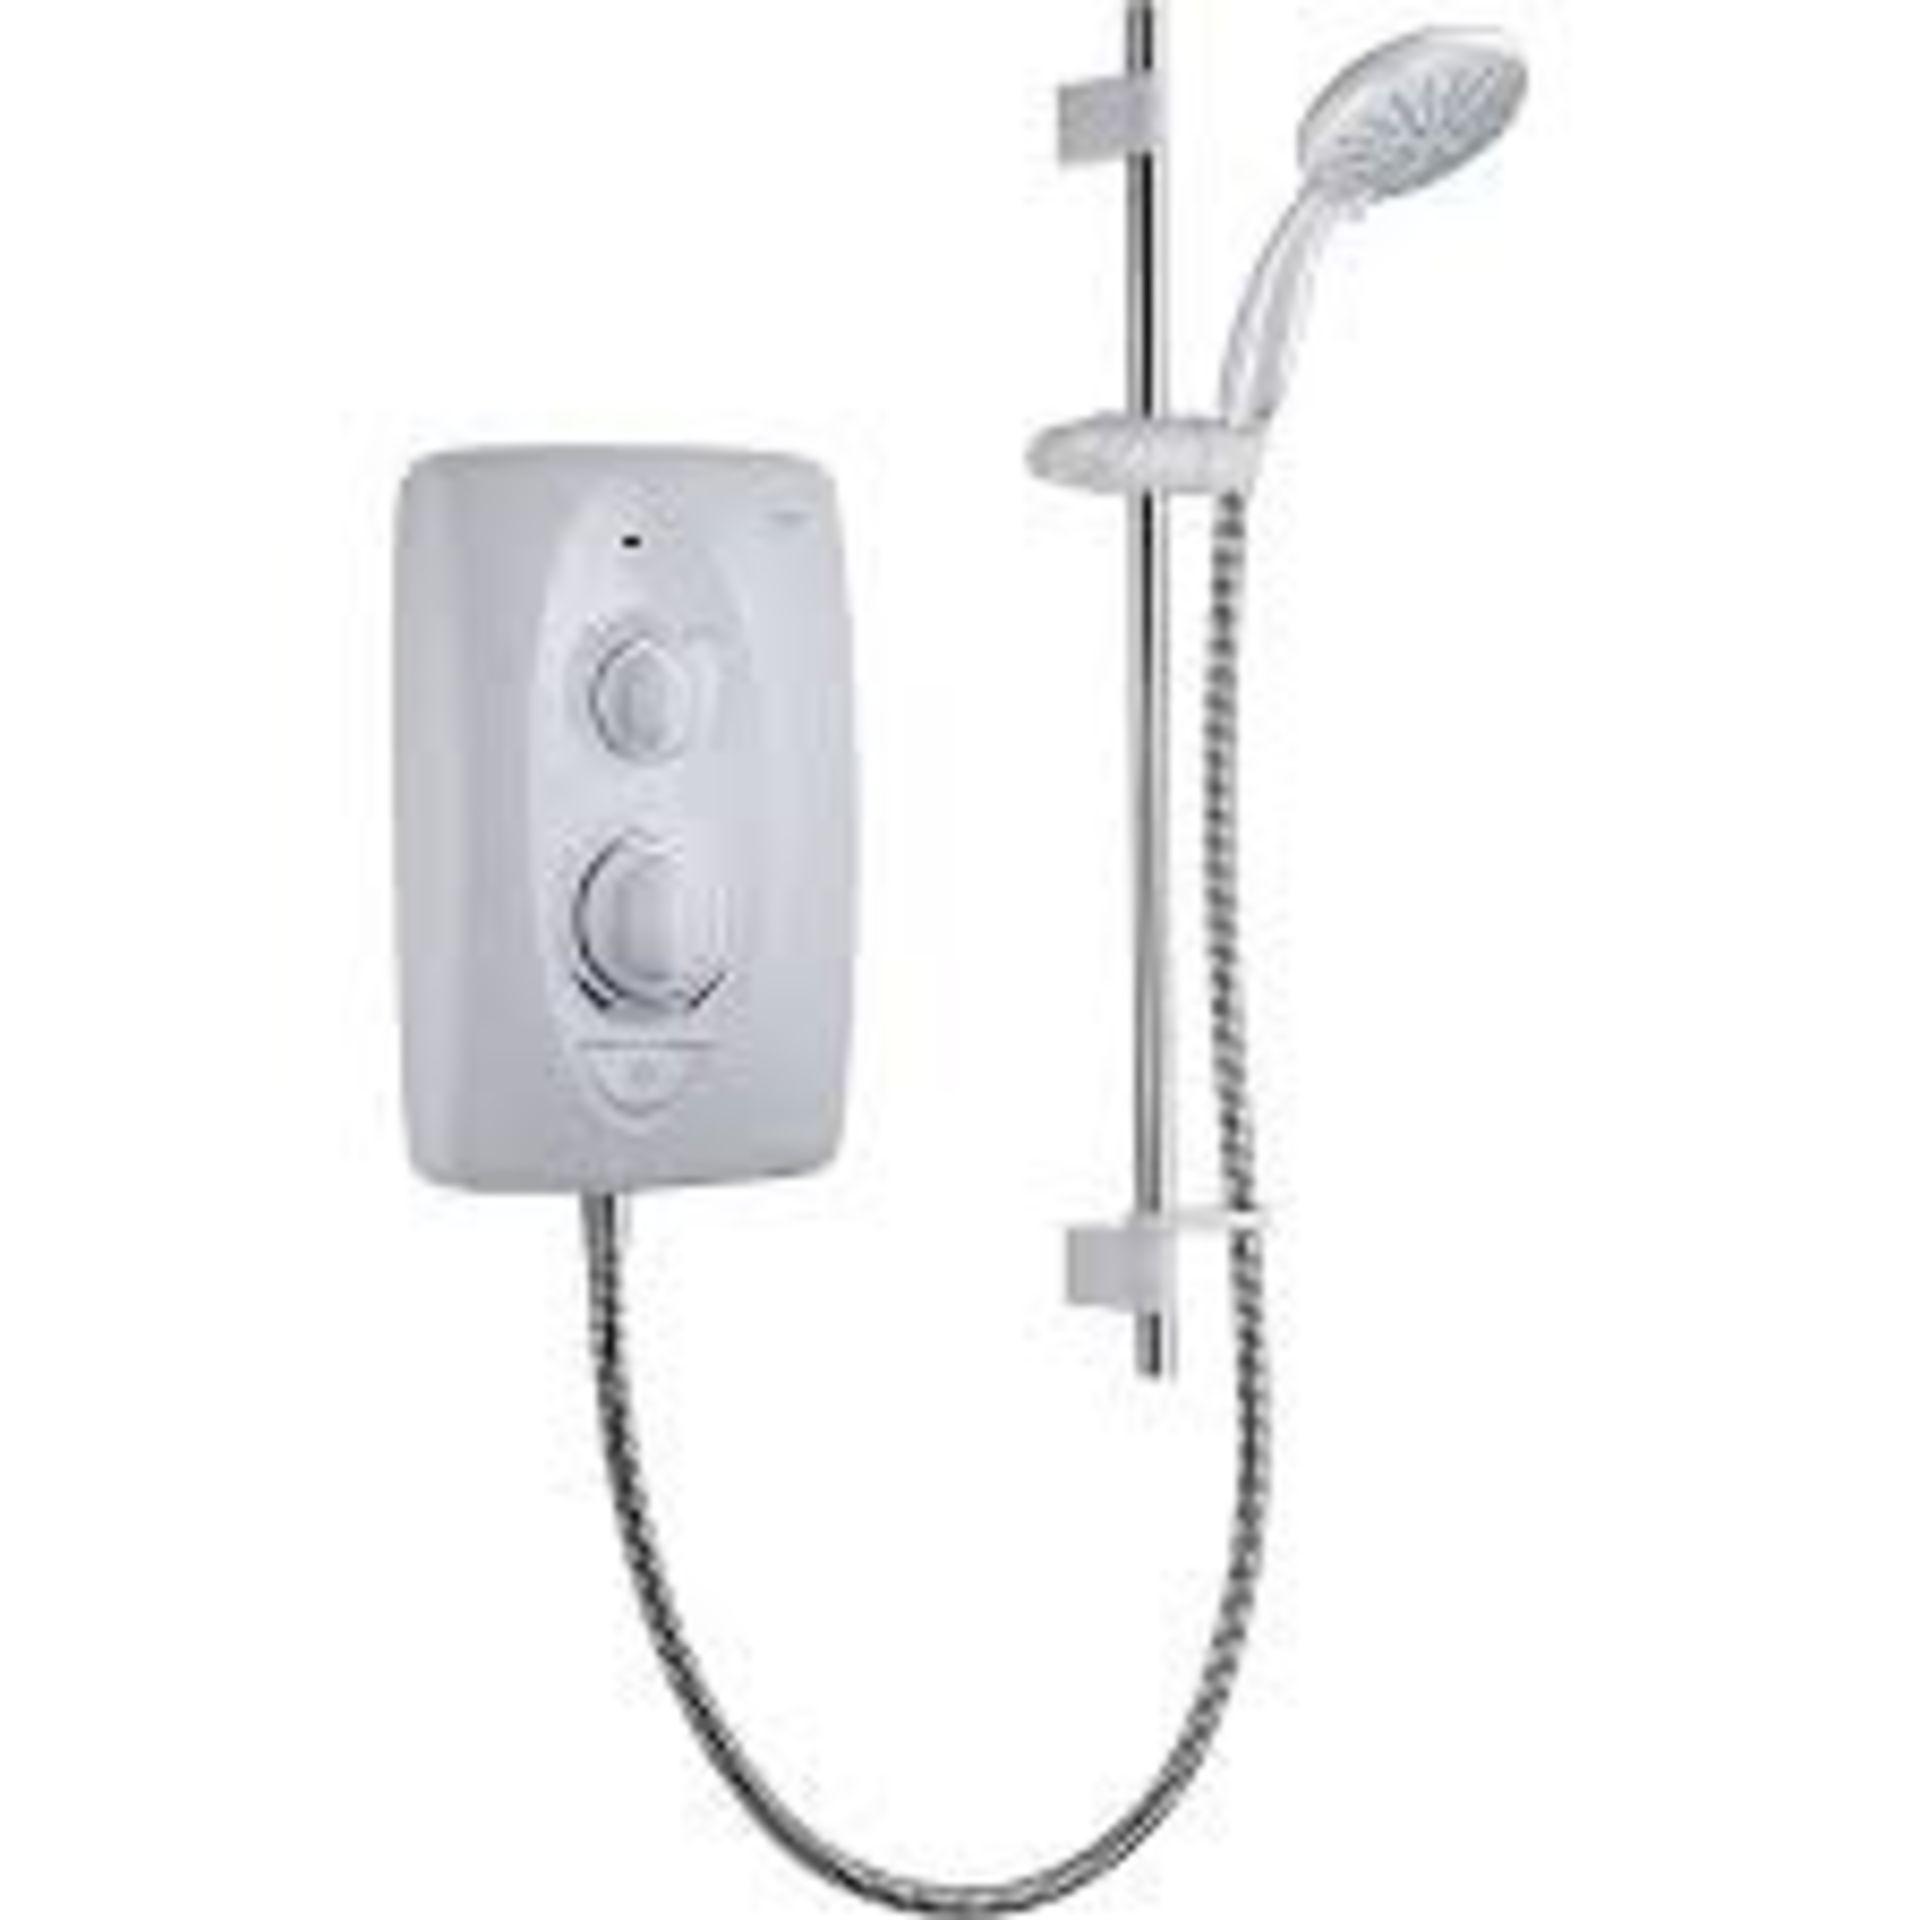 Mira Sprint Multi-Fit White 8.5kW Electric Shower - ER44